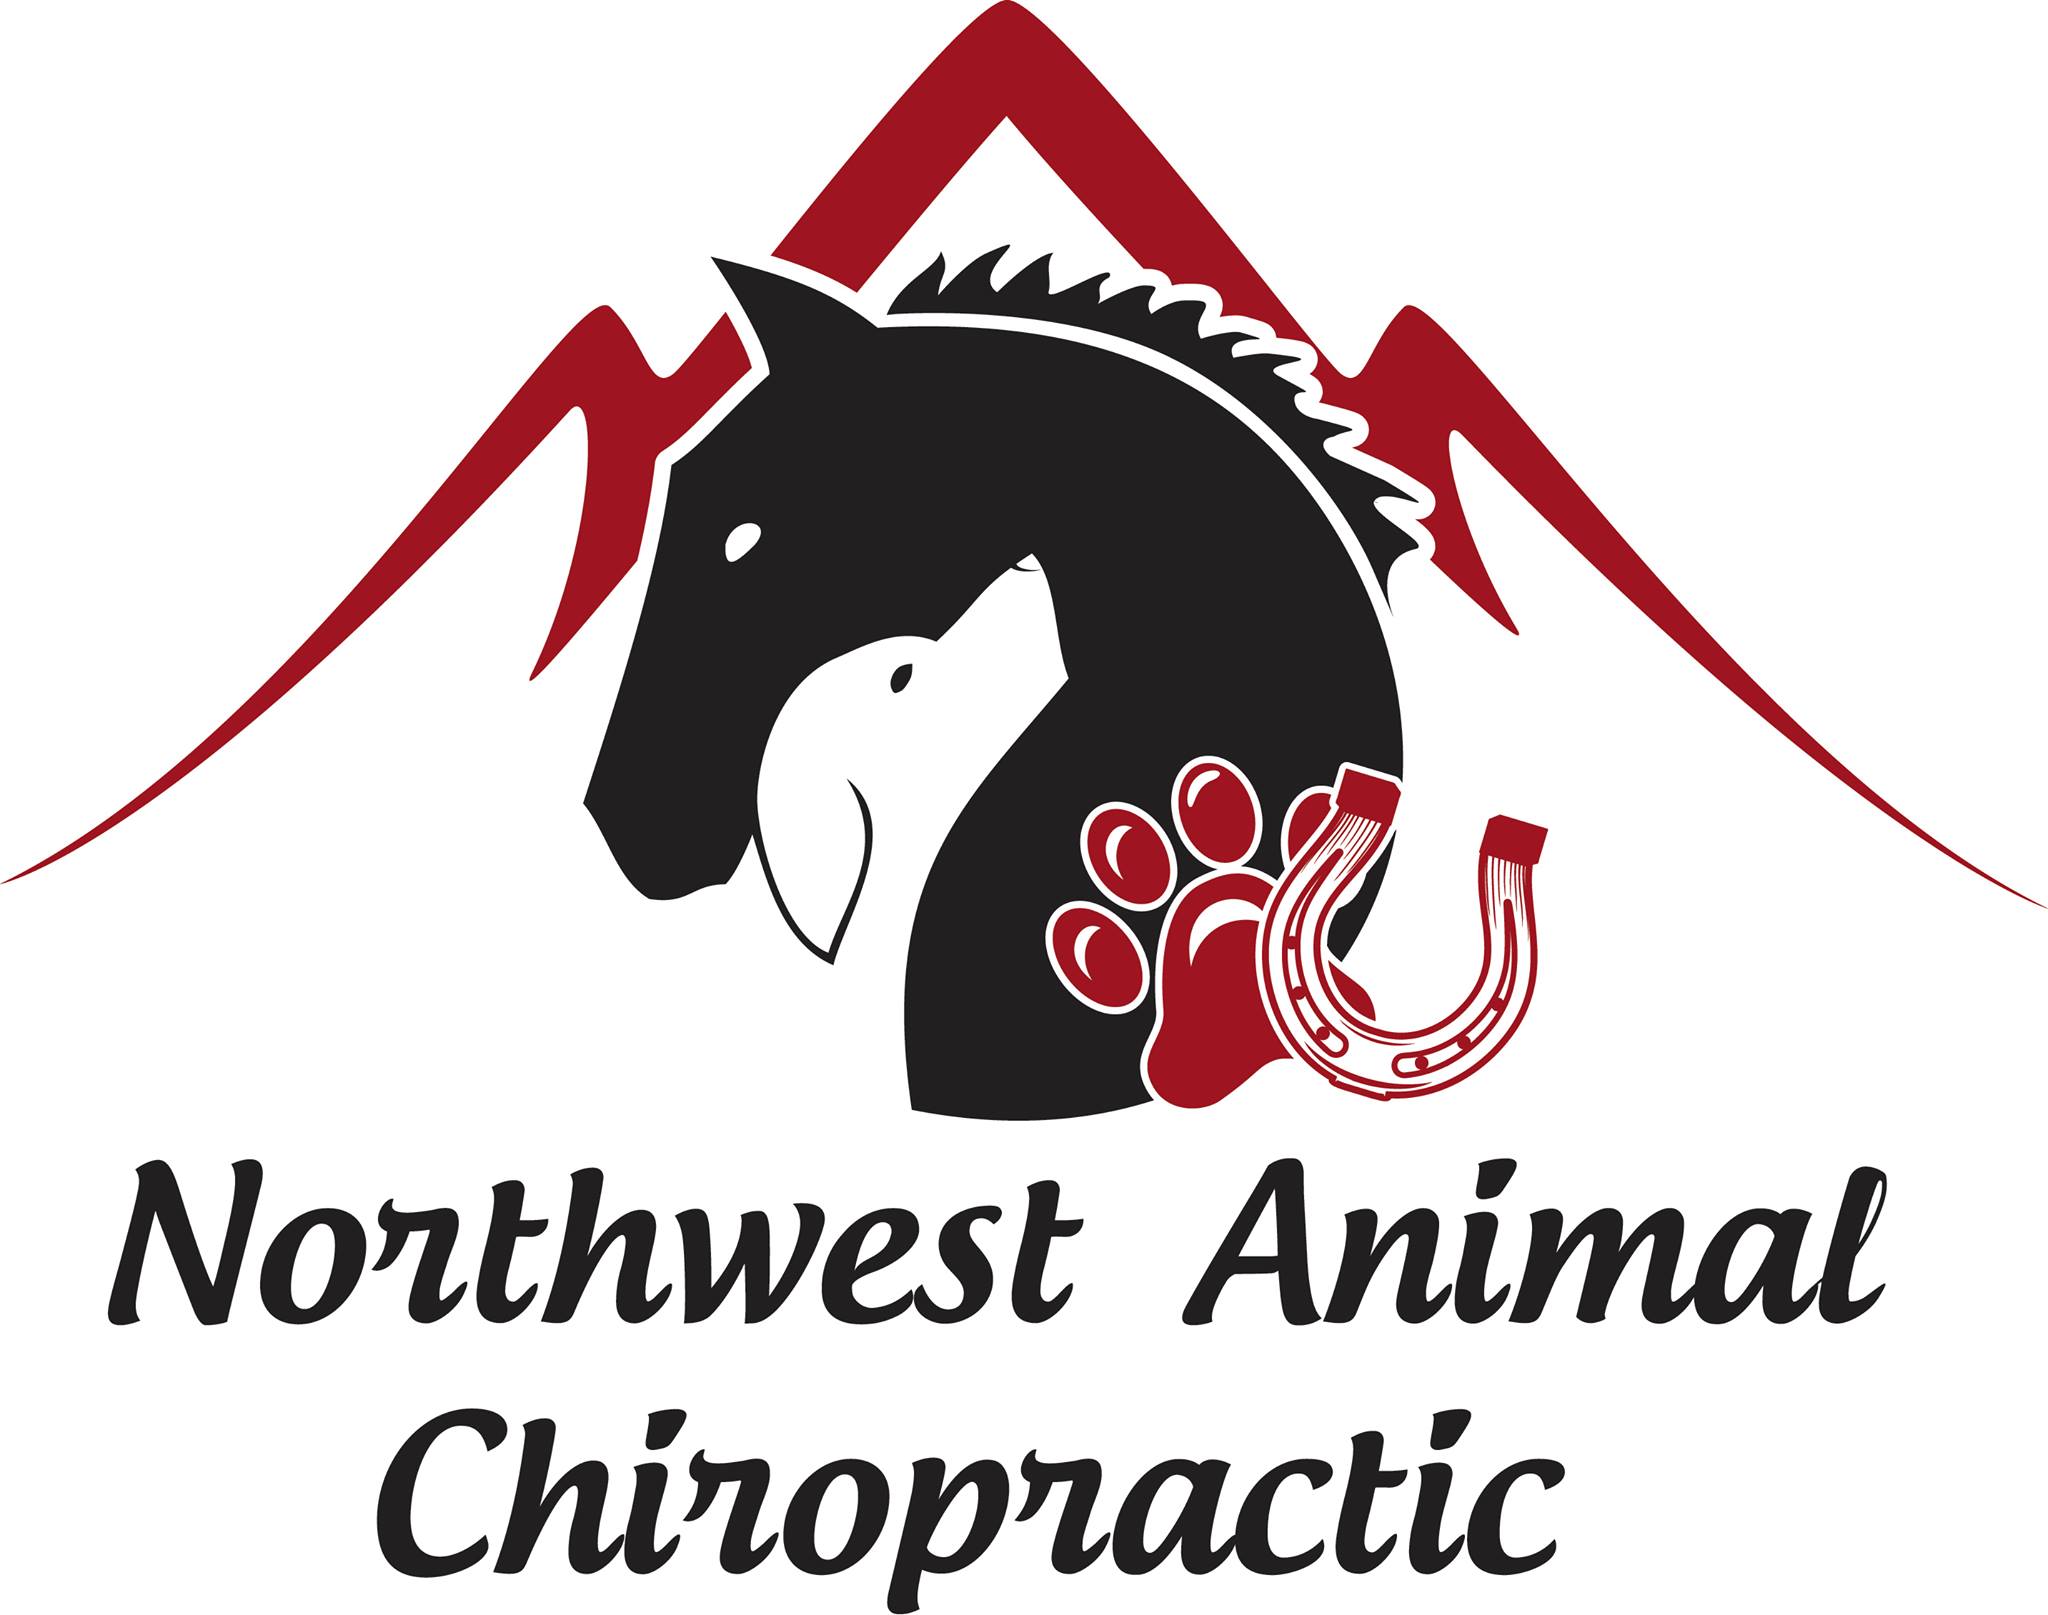 Providing the best alternative/ intergrated care to the animals of the Inland Northwest.